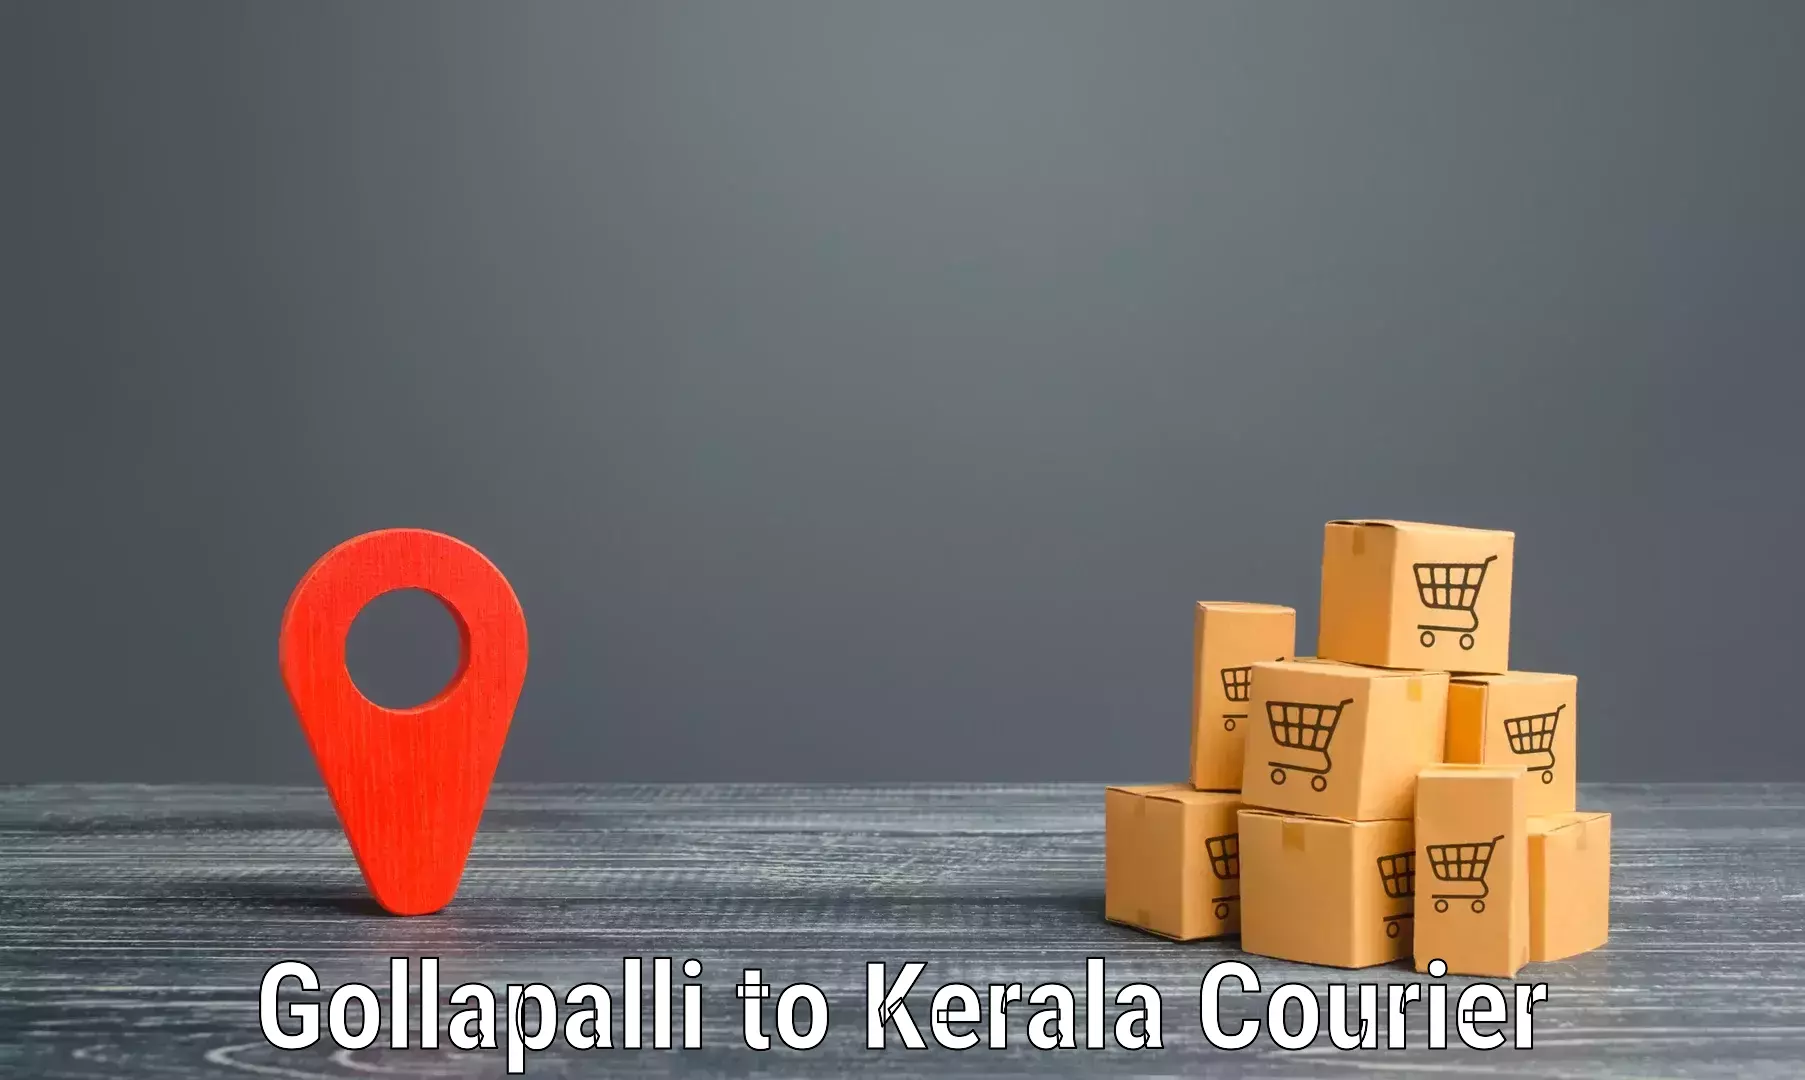 Courier service partnerships Gollapalli to Kerala